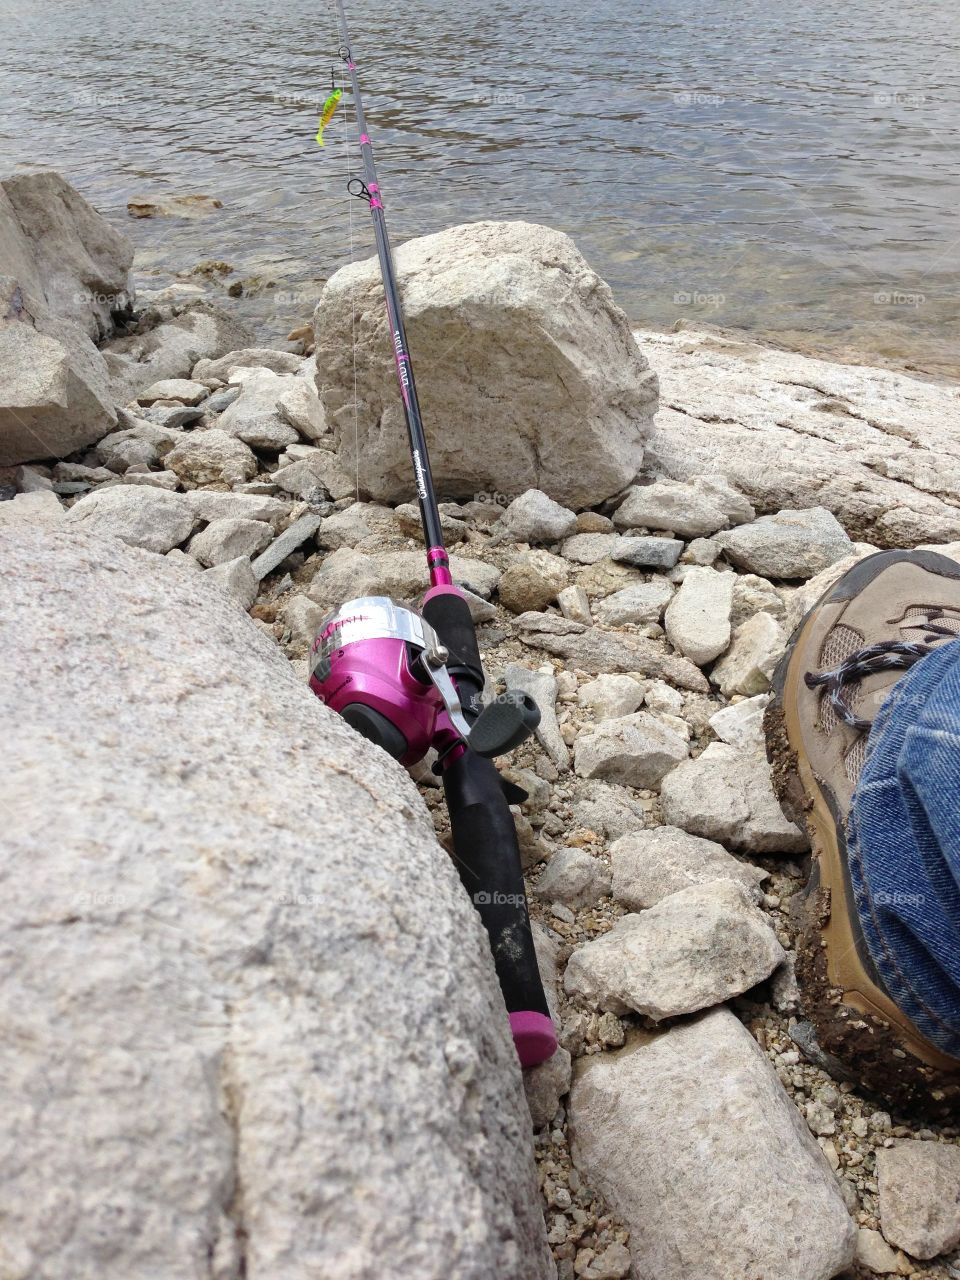 Girl Fishing. Bright pink fishing pole on the rocks of the lake shore